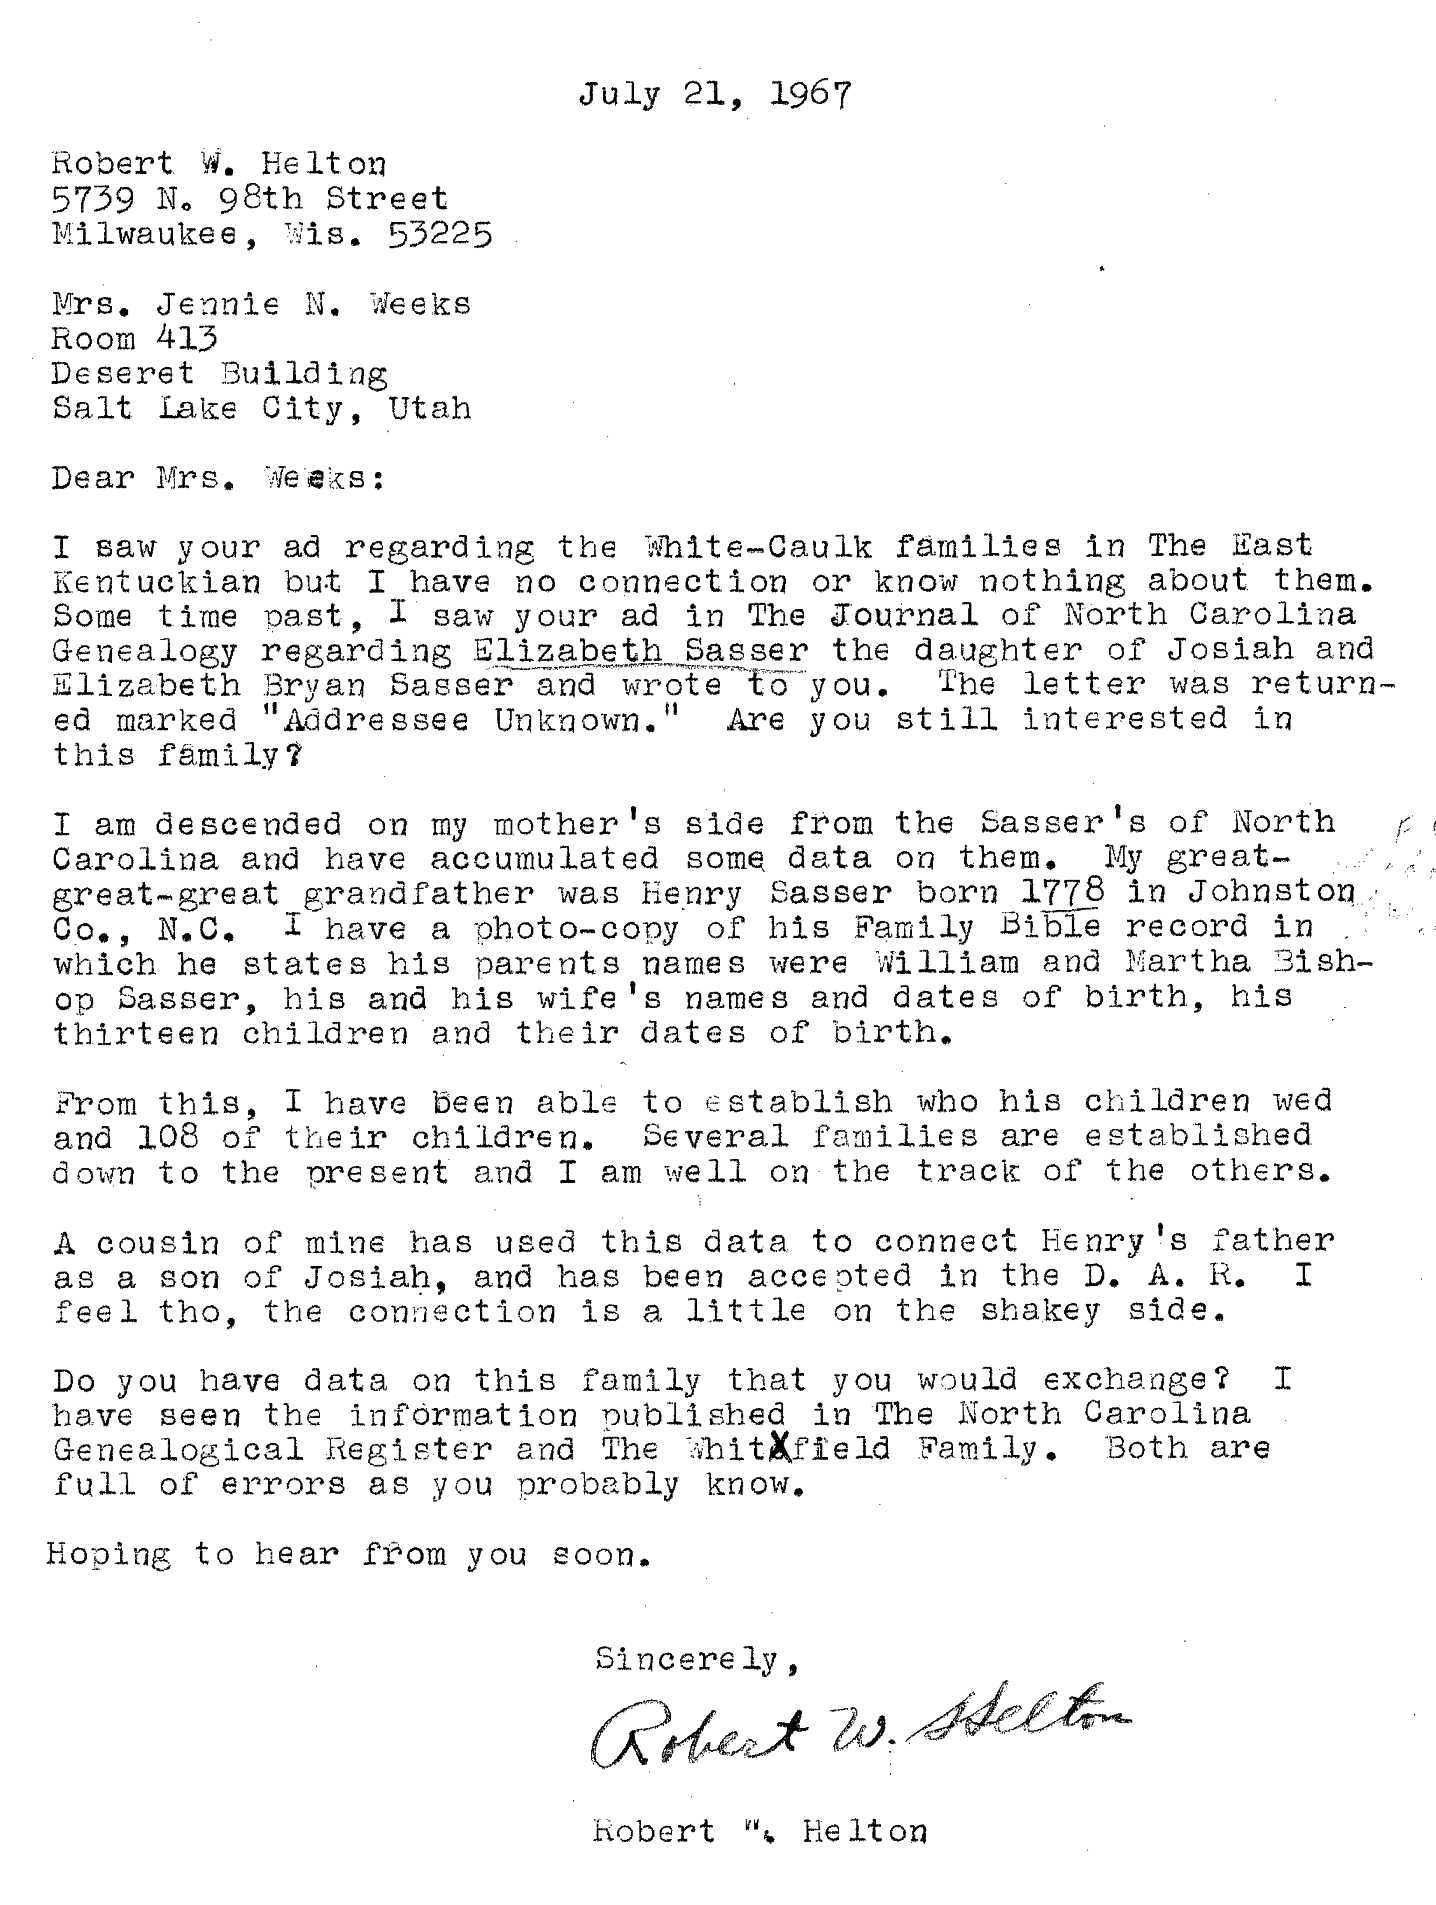 Letter from Robert Helton 2small